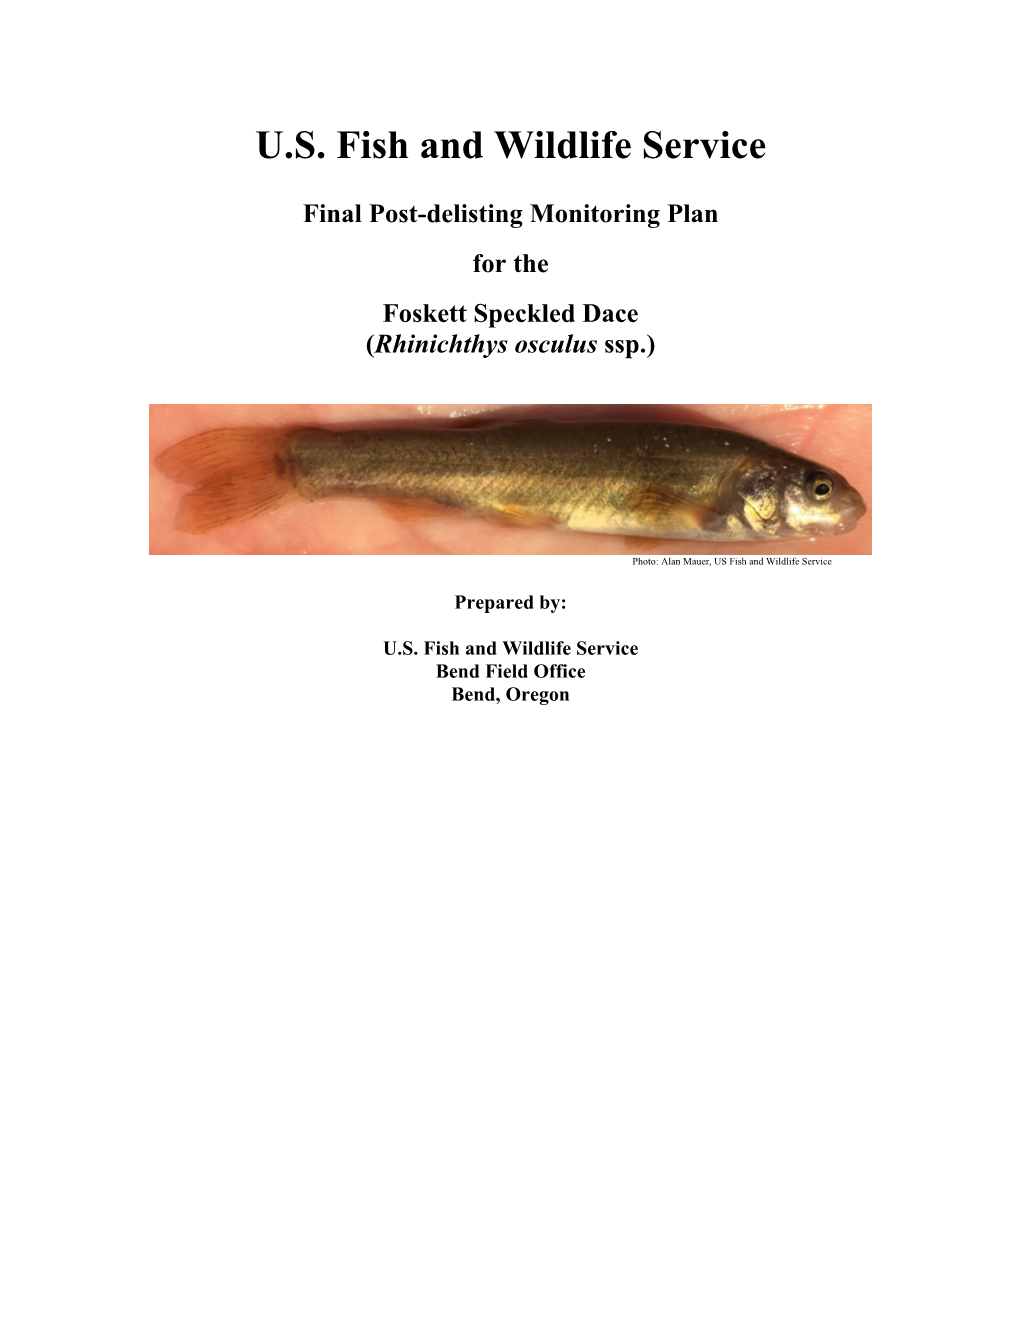 US Fish and Wildlife Service Final Post-Delisting Monitoring Plan for the Foskett Speckled Dace